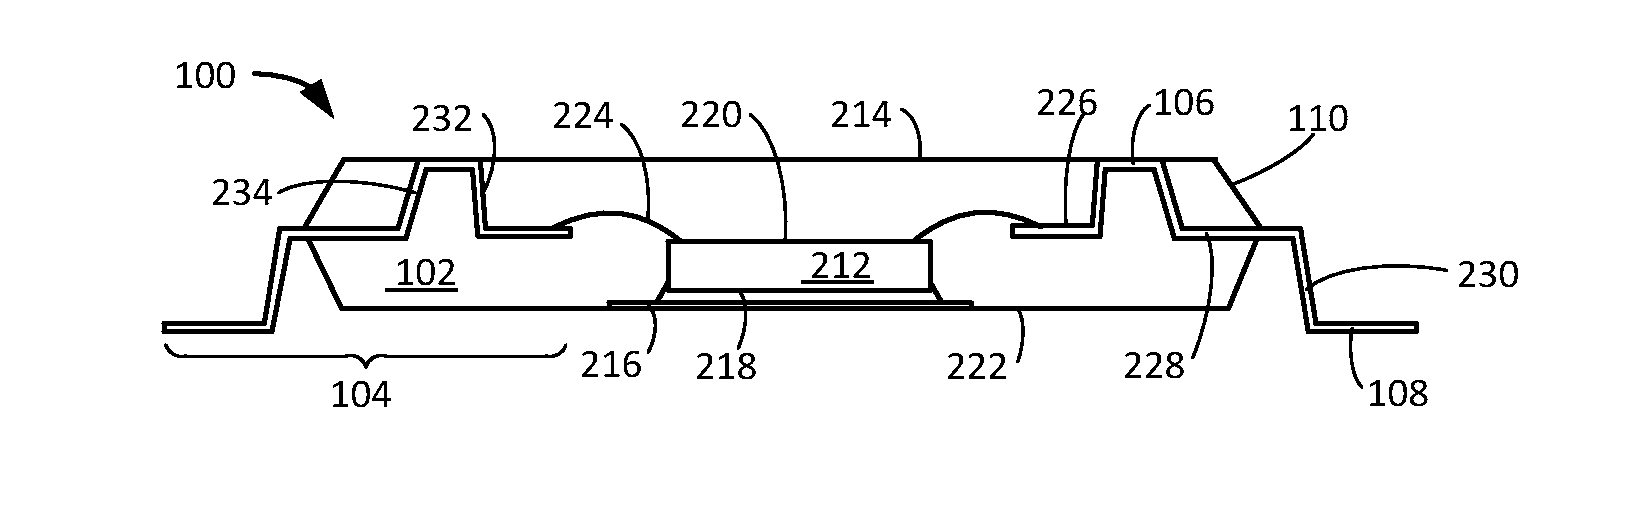 Integrated circuit package system with dual connectivity